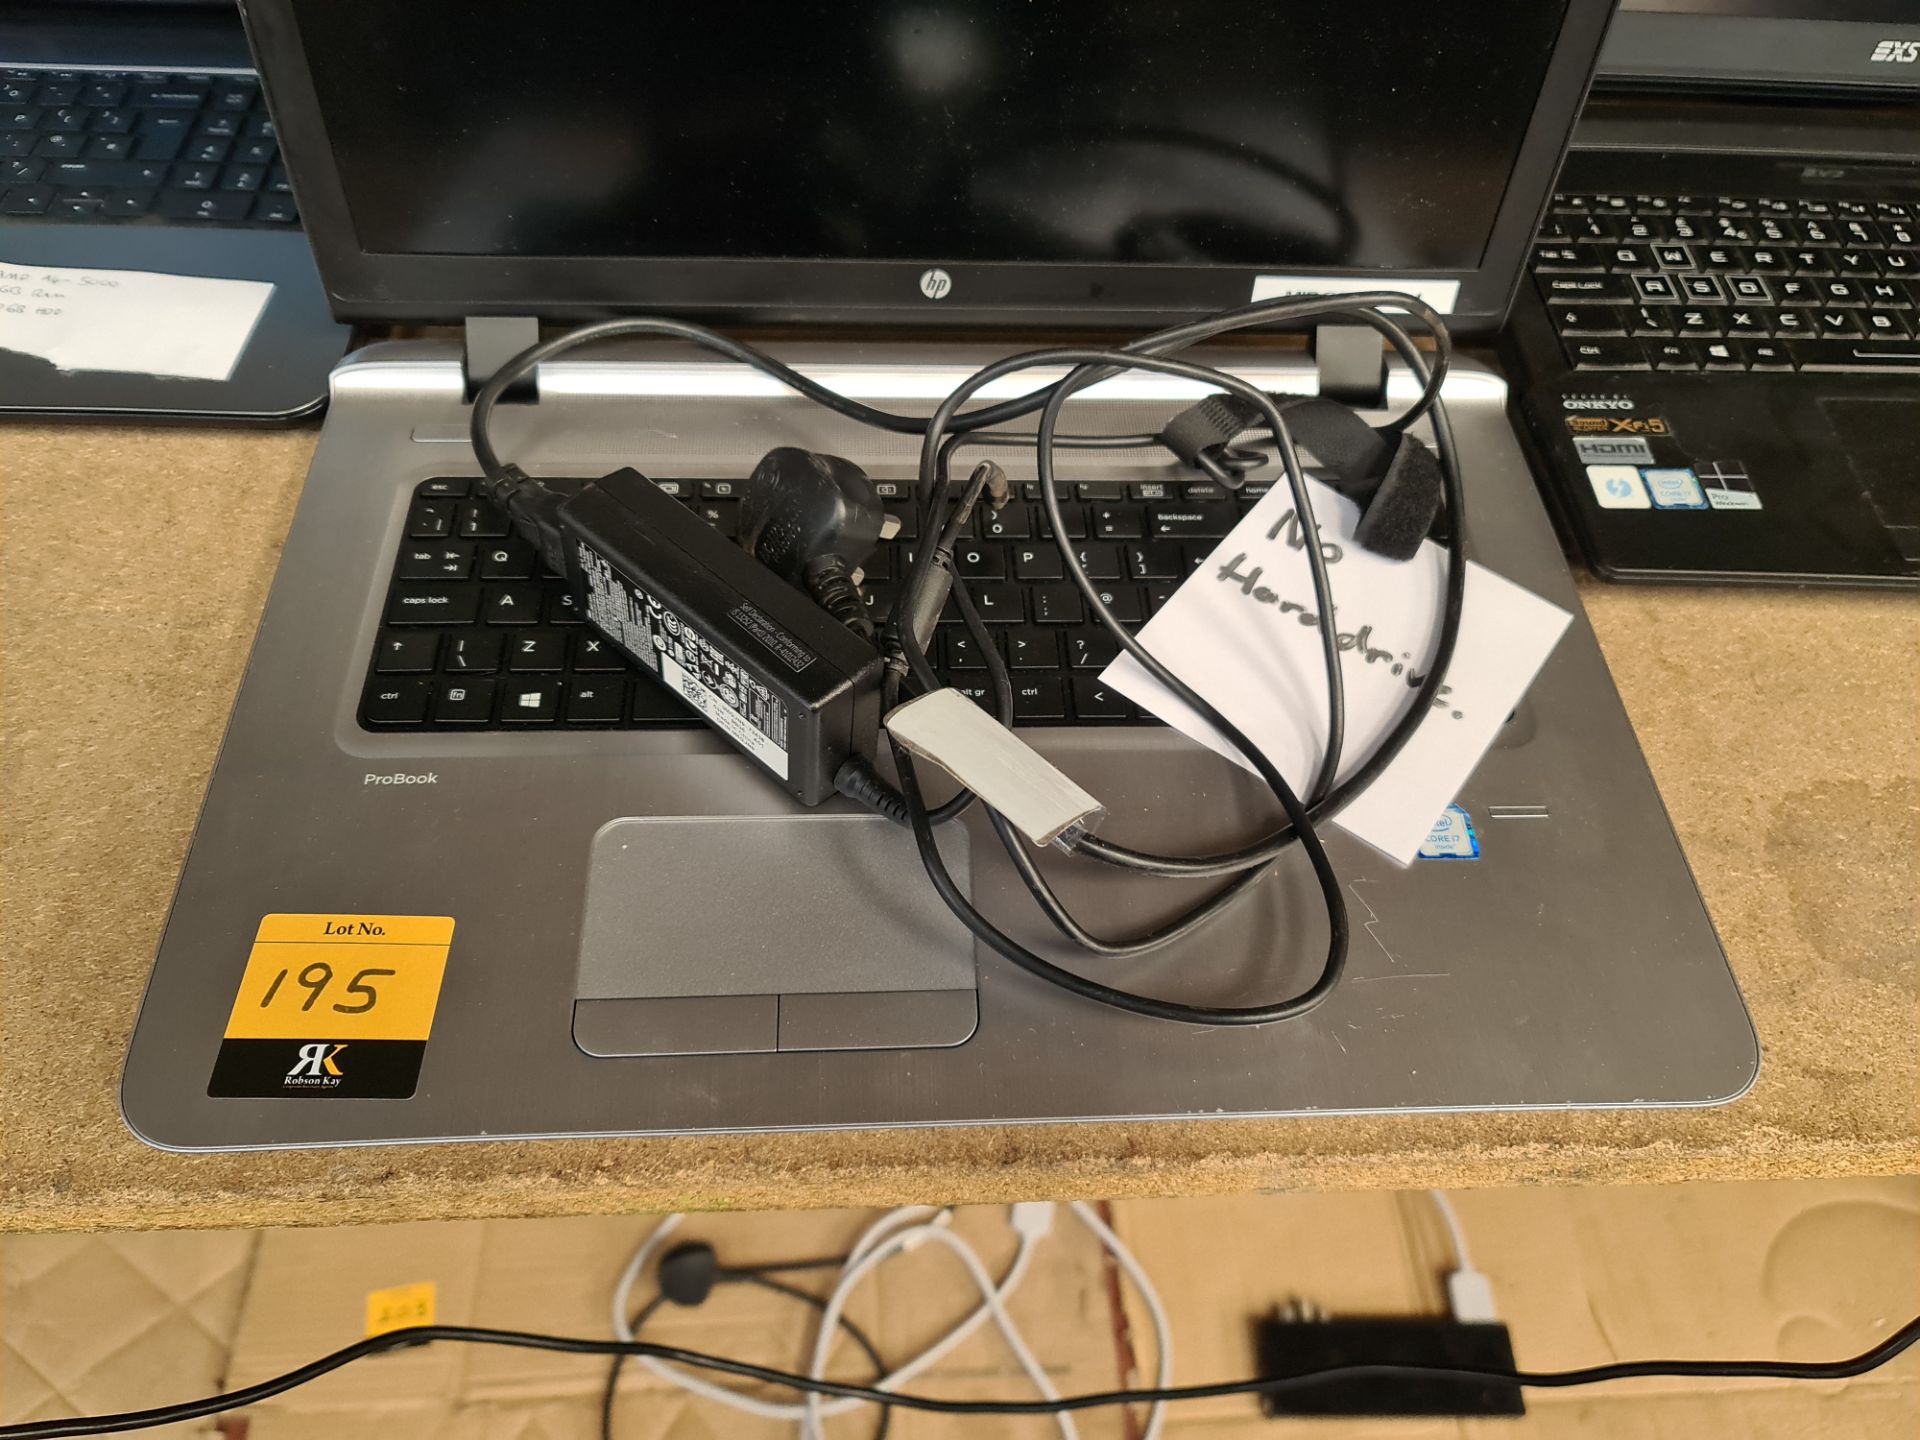 HP Intel Core i7notebook computer including powerpack/charger - no hard drive - Image 3 of 3